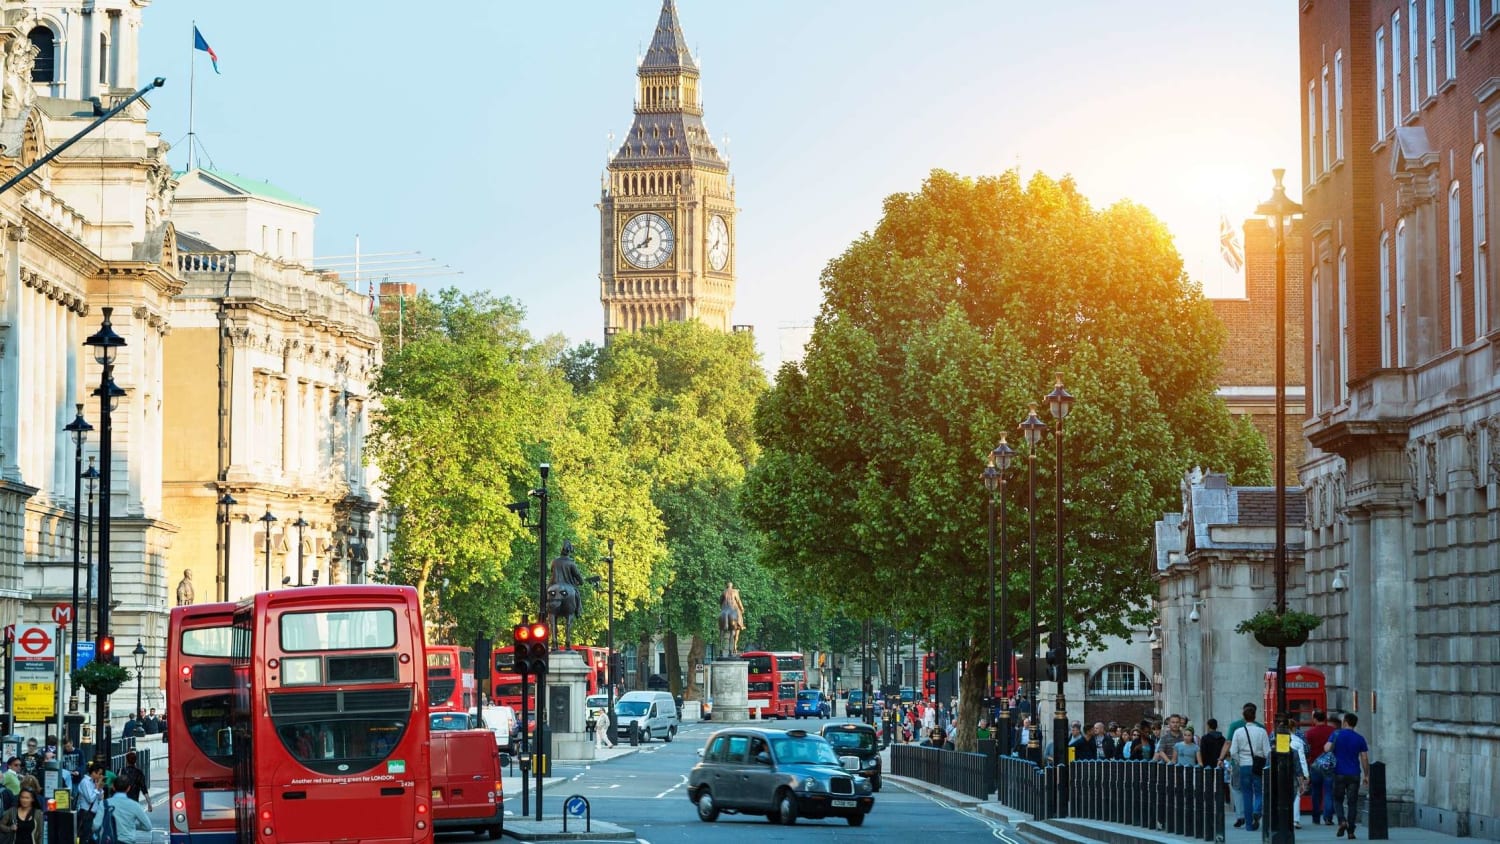 Planning A Trip To London - A First Timer's Guide On Things To Know - London Kensington Guide